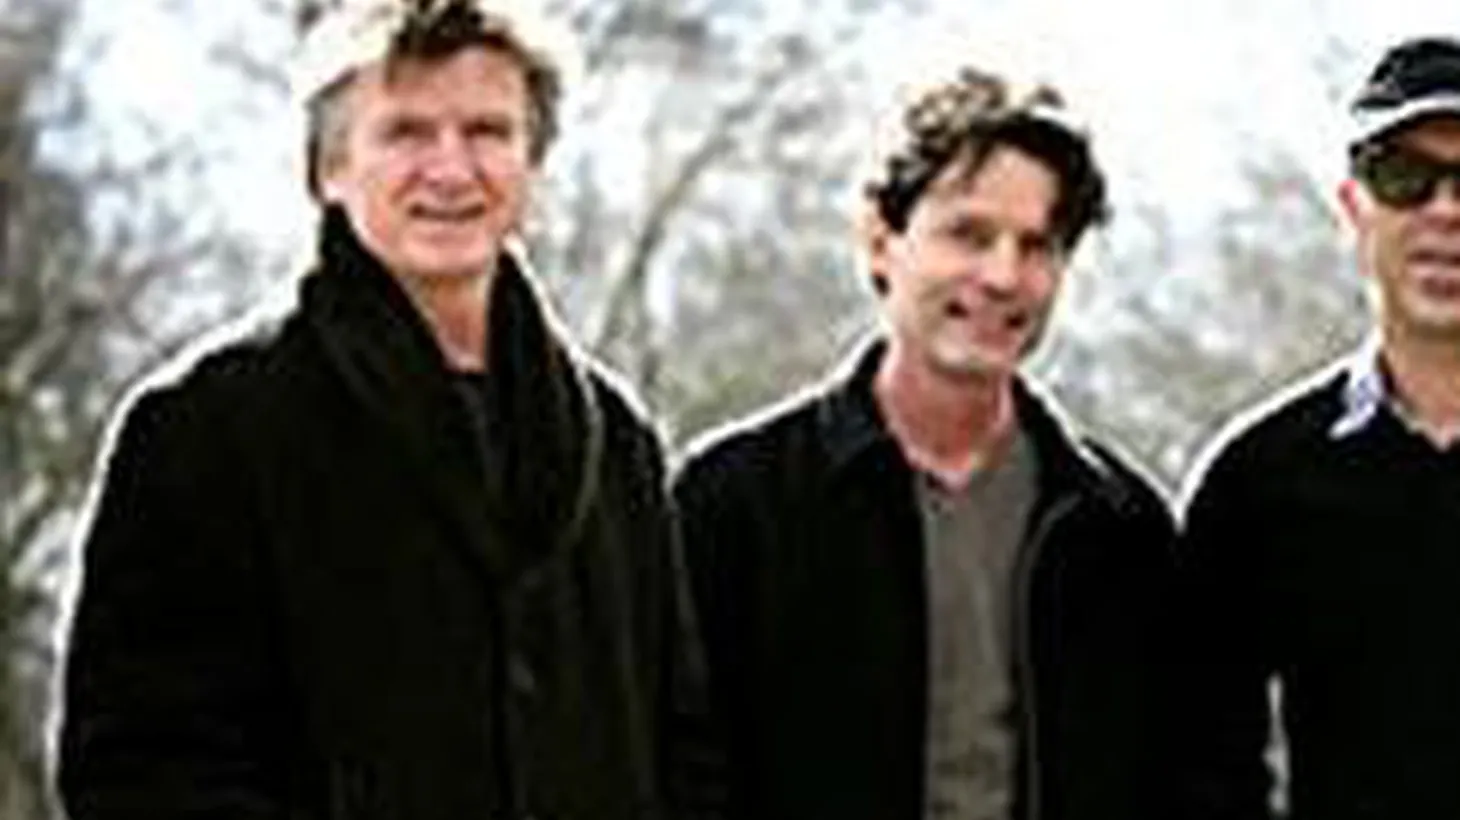 New Zealanders Crowded House have reunited and will perform on Morning Becomes Eclectic at 11:15am.